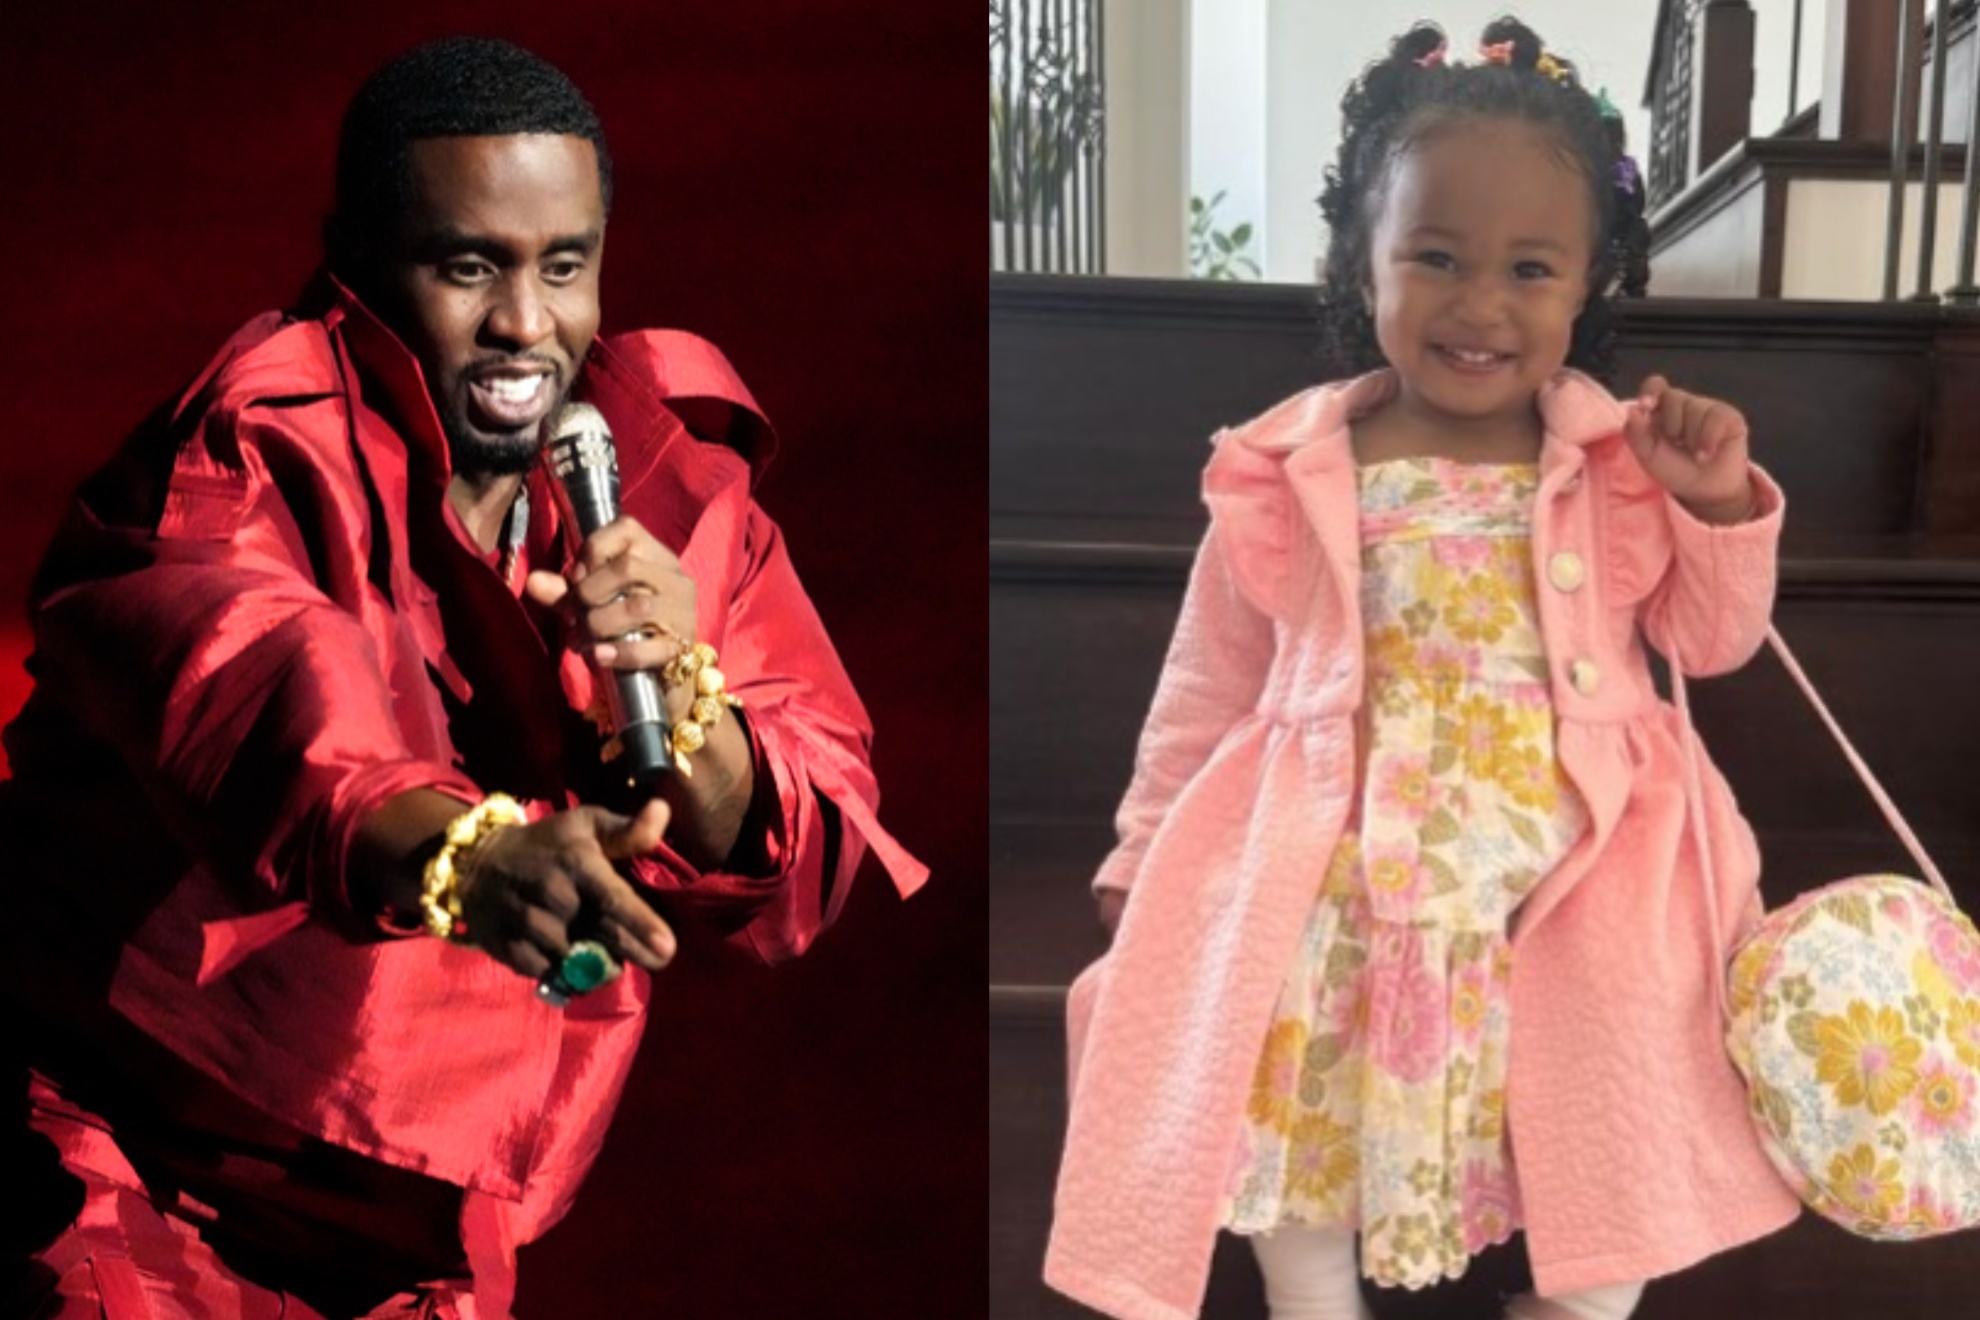 Diddy posted a photo on Instagram for Easter Sunday featuring his daughter, Love